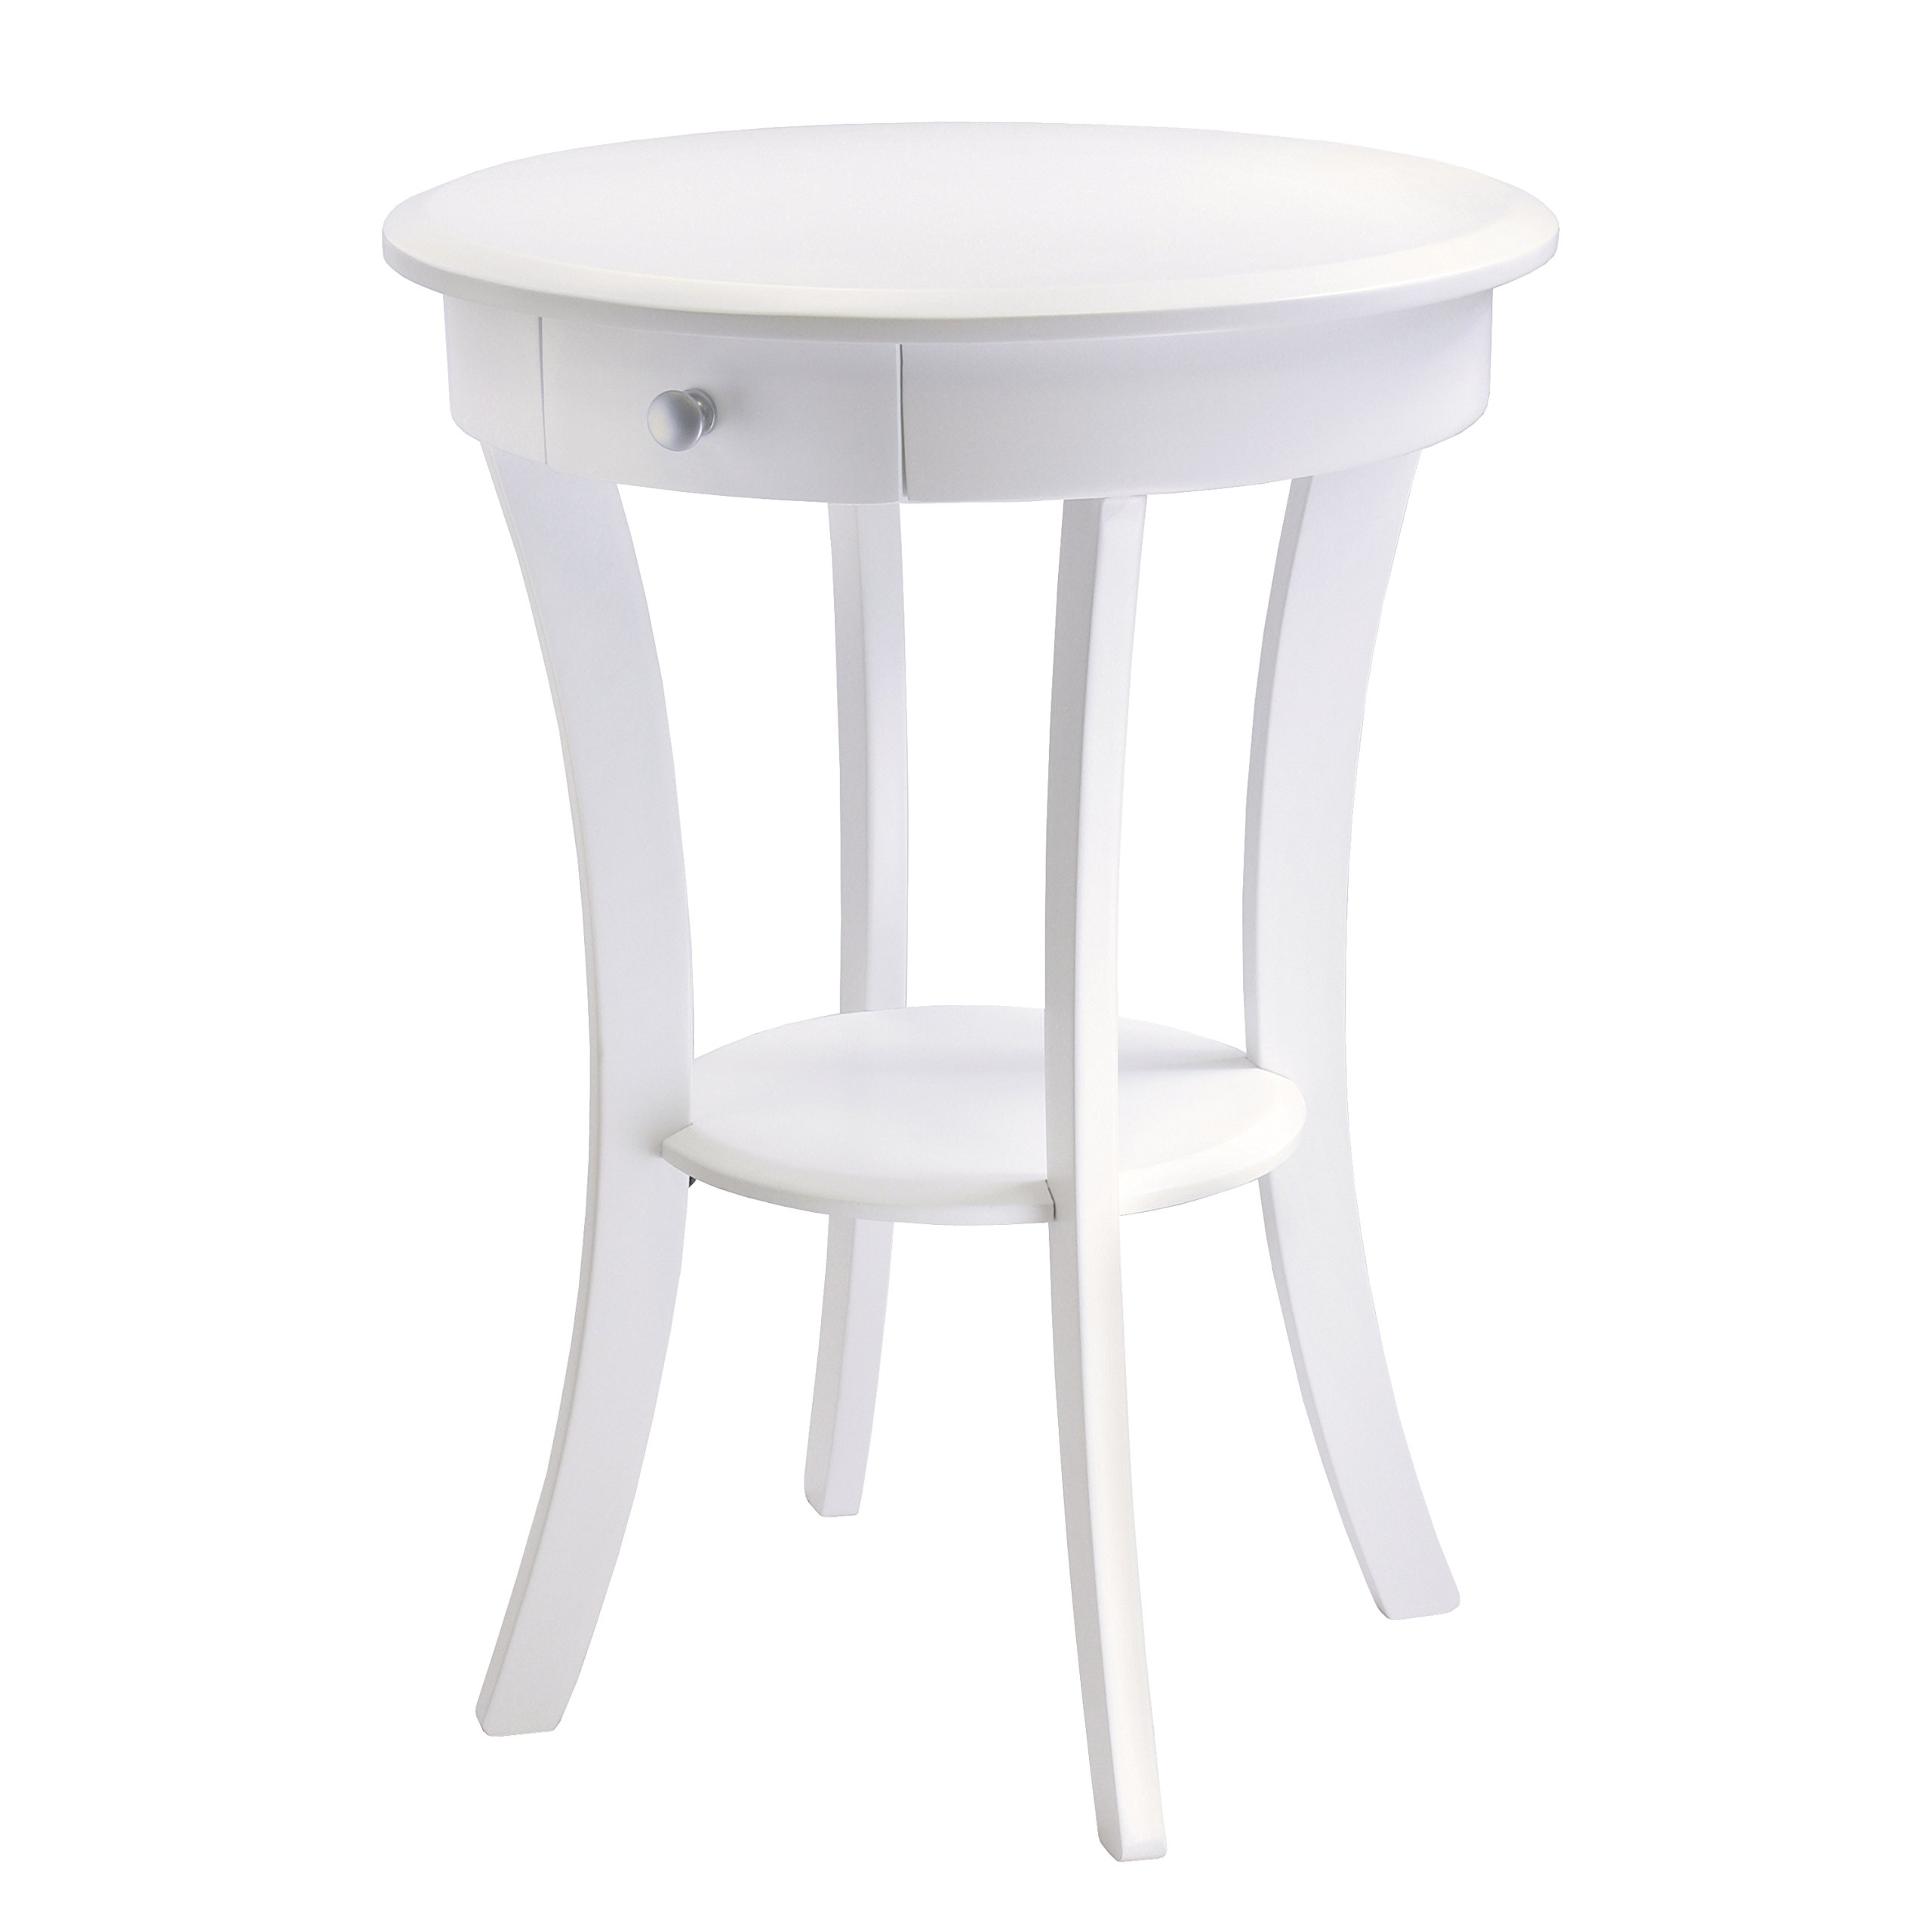 modern white bench tables accent cabinet for and round room threshold furniture antique tall ott gold target outdoor decorative table living glass kijiji with storage full size